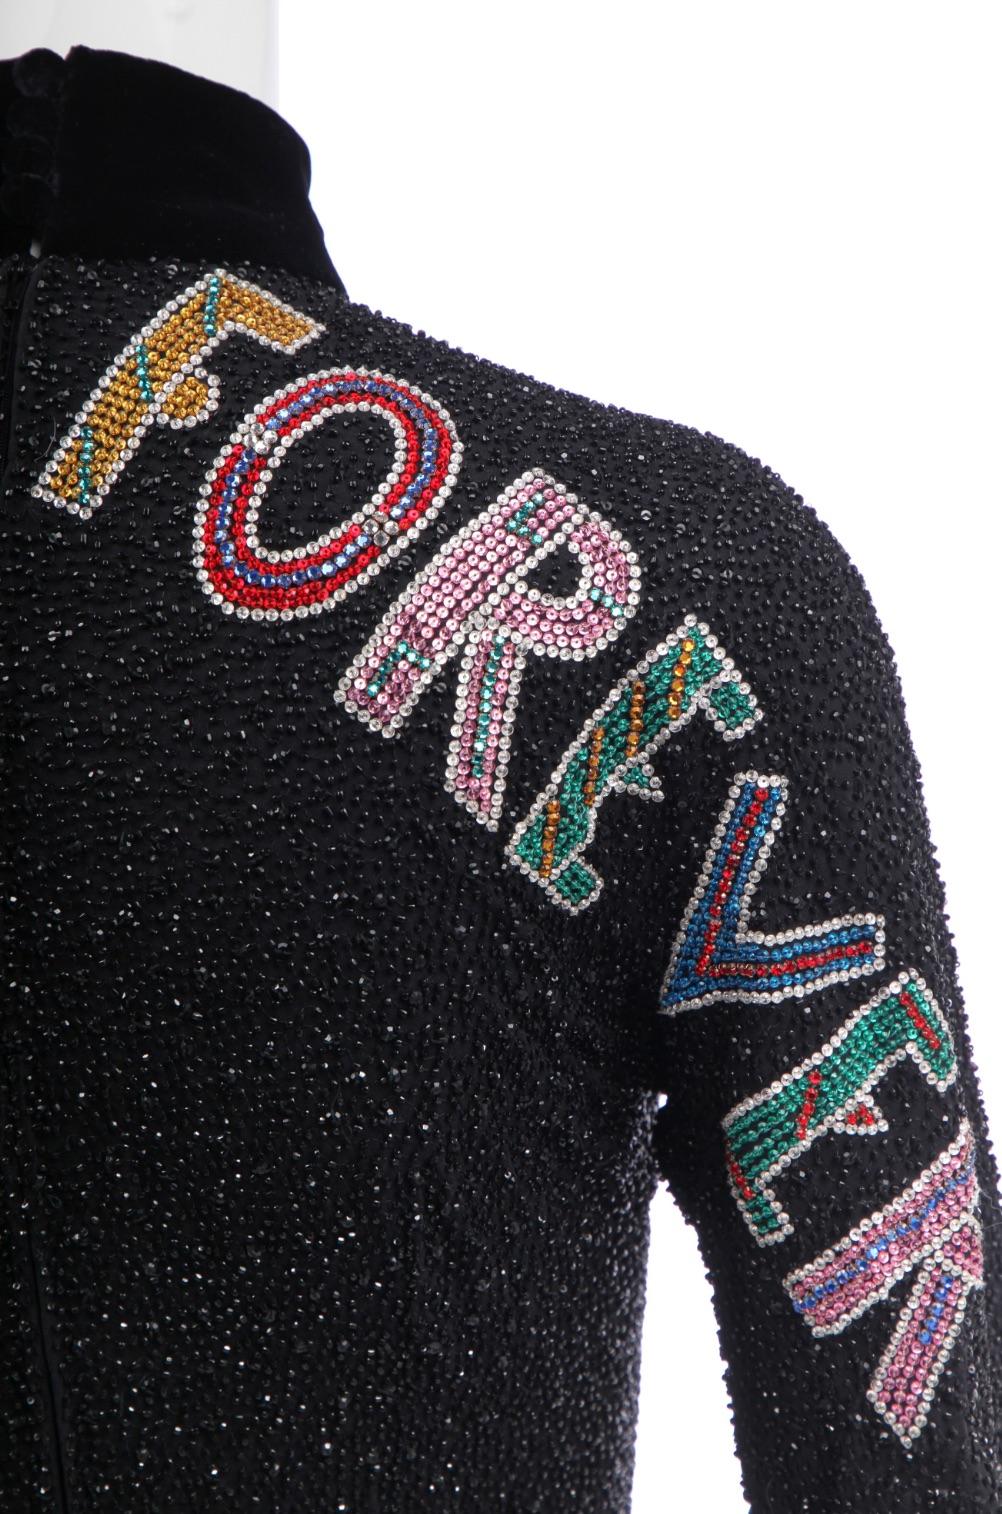 Gianni Versace couture beaded 'Java Forever' dress, Autumn-Winter 1989-90 1